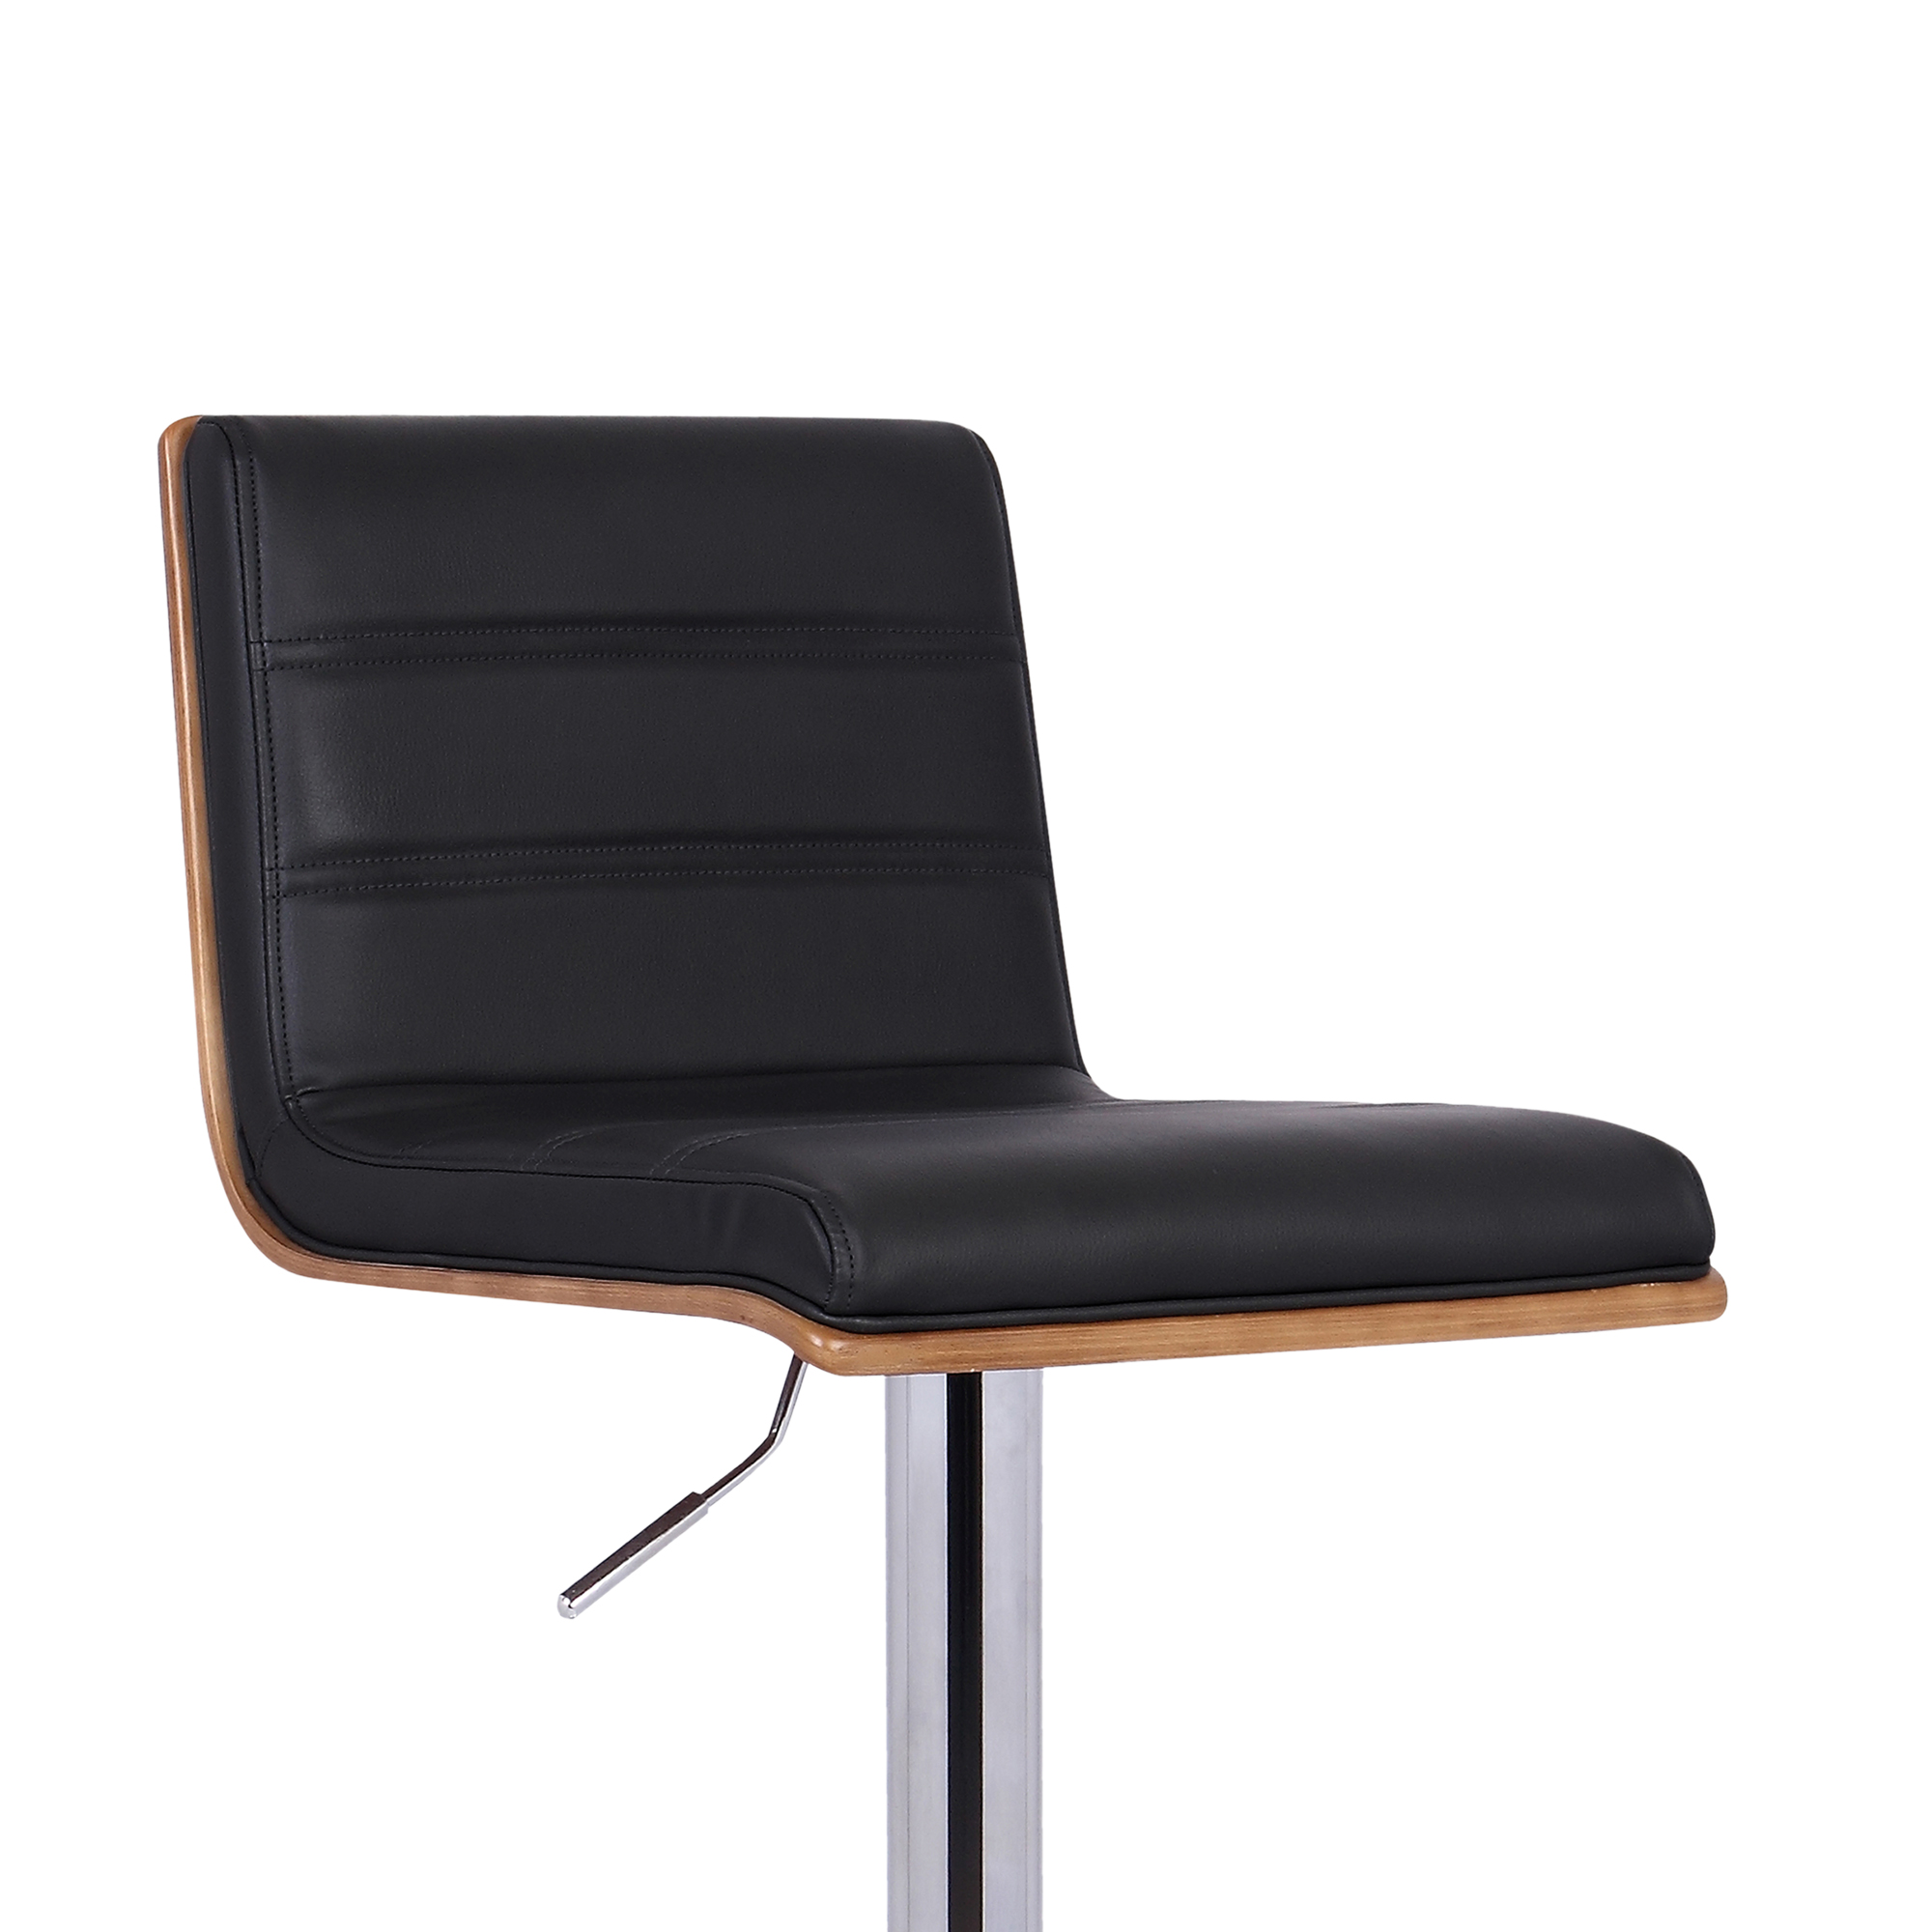 Armen Living Aubrey Barstool in Black Faux Leather, Walnut Wood and Chrome Finish